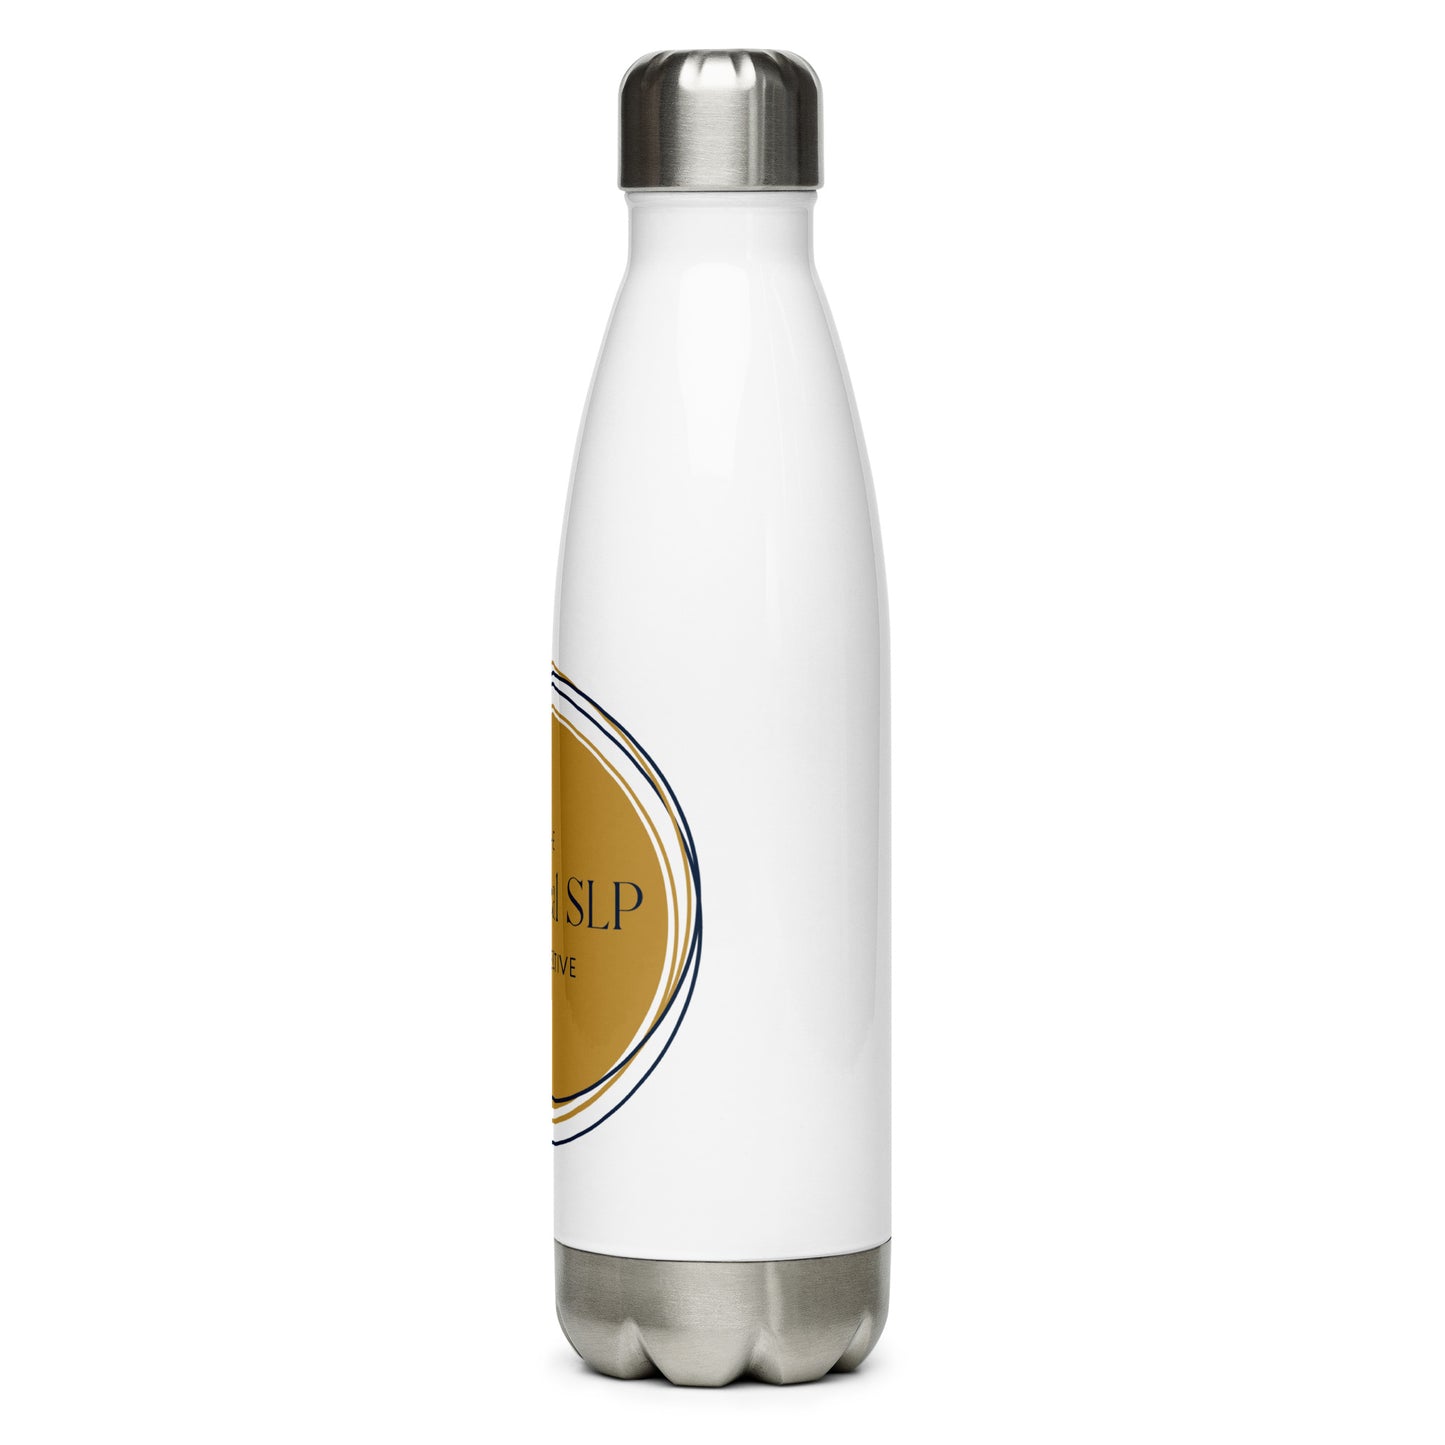 The Collective Stainless Steel Water Bottle